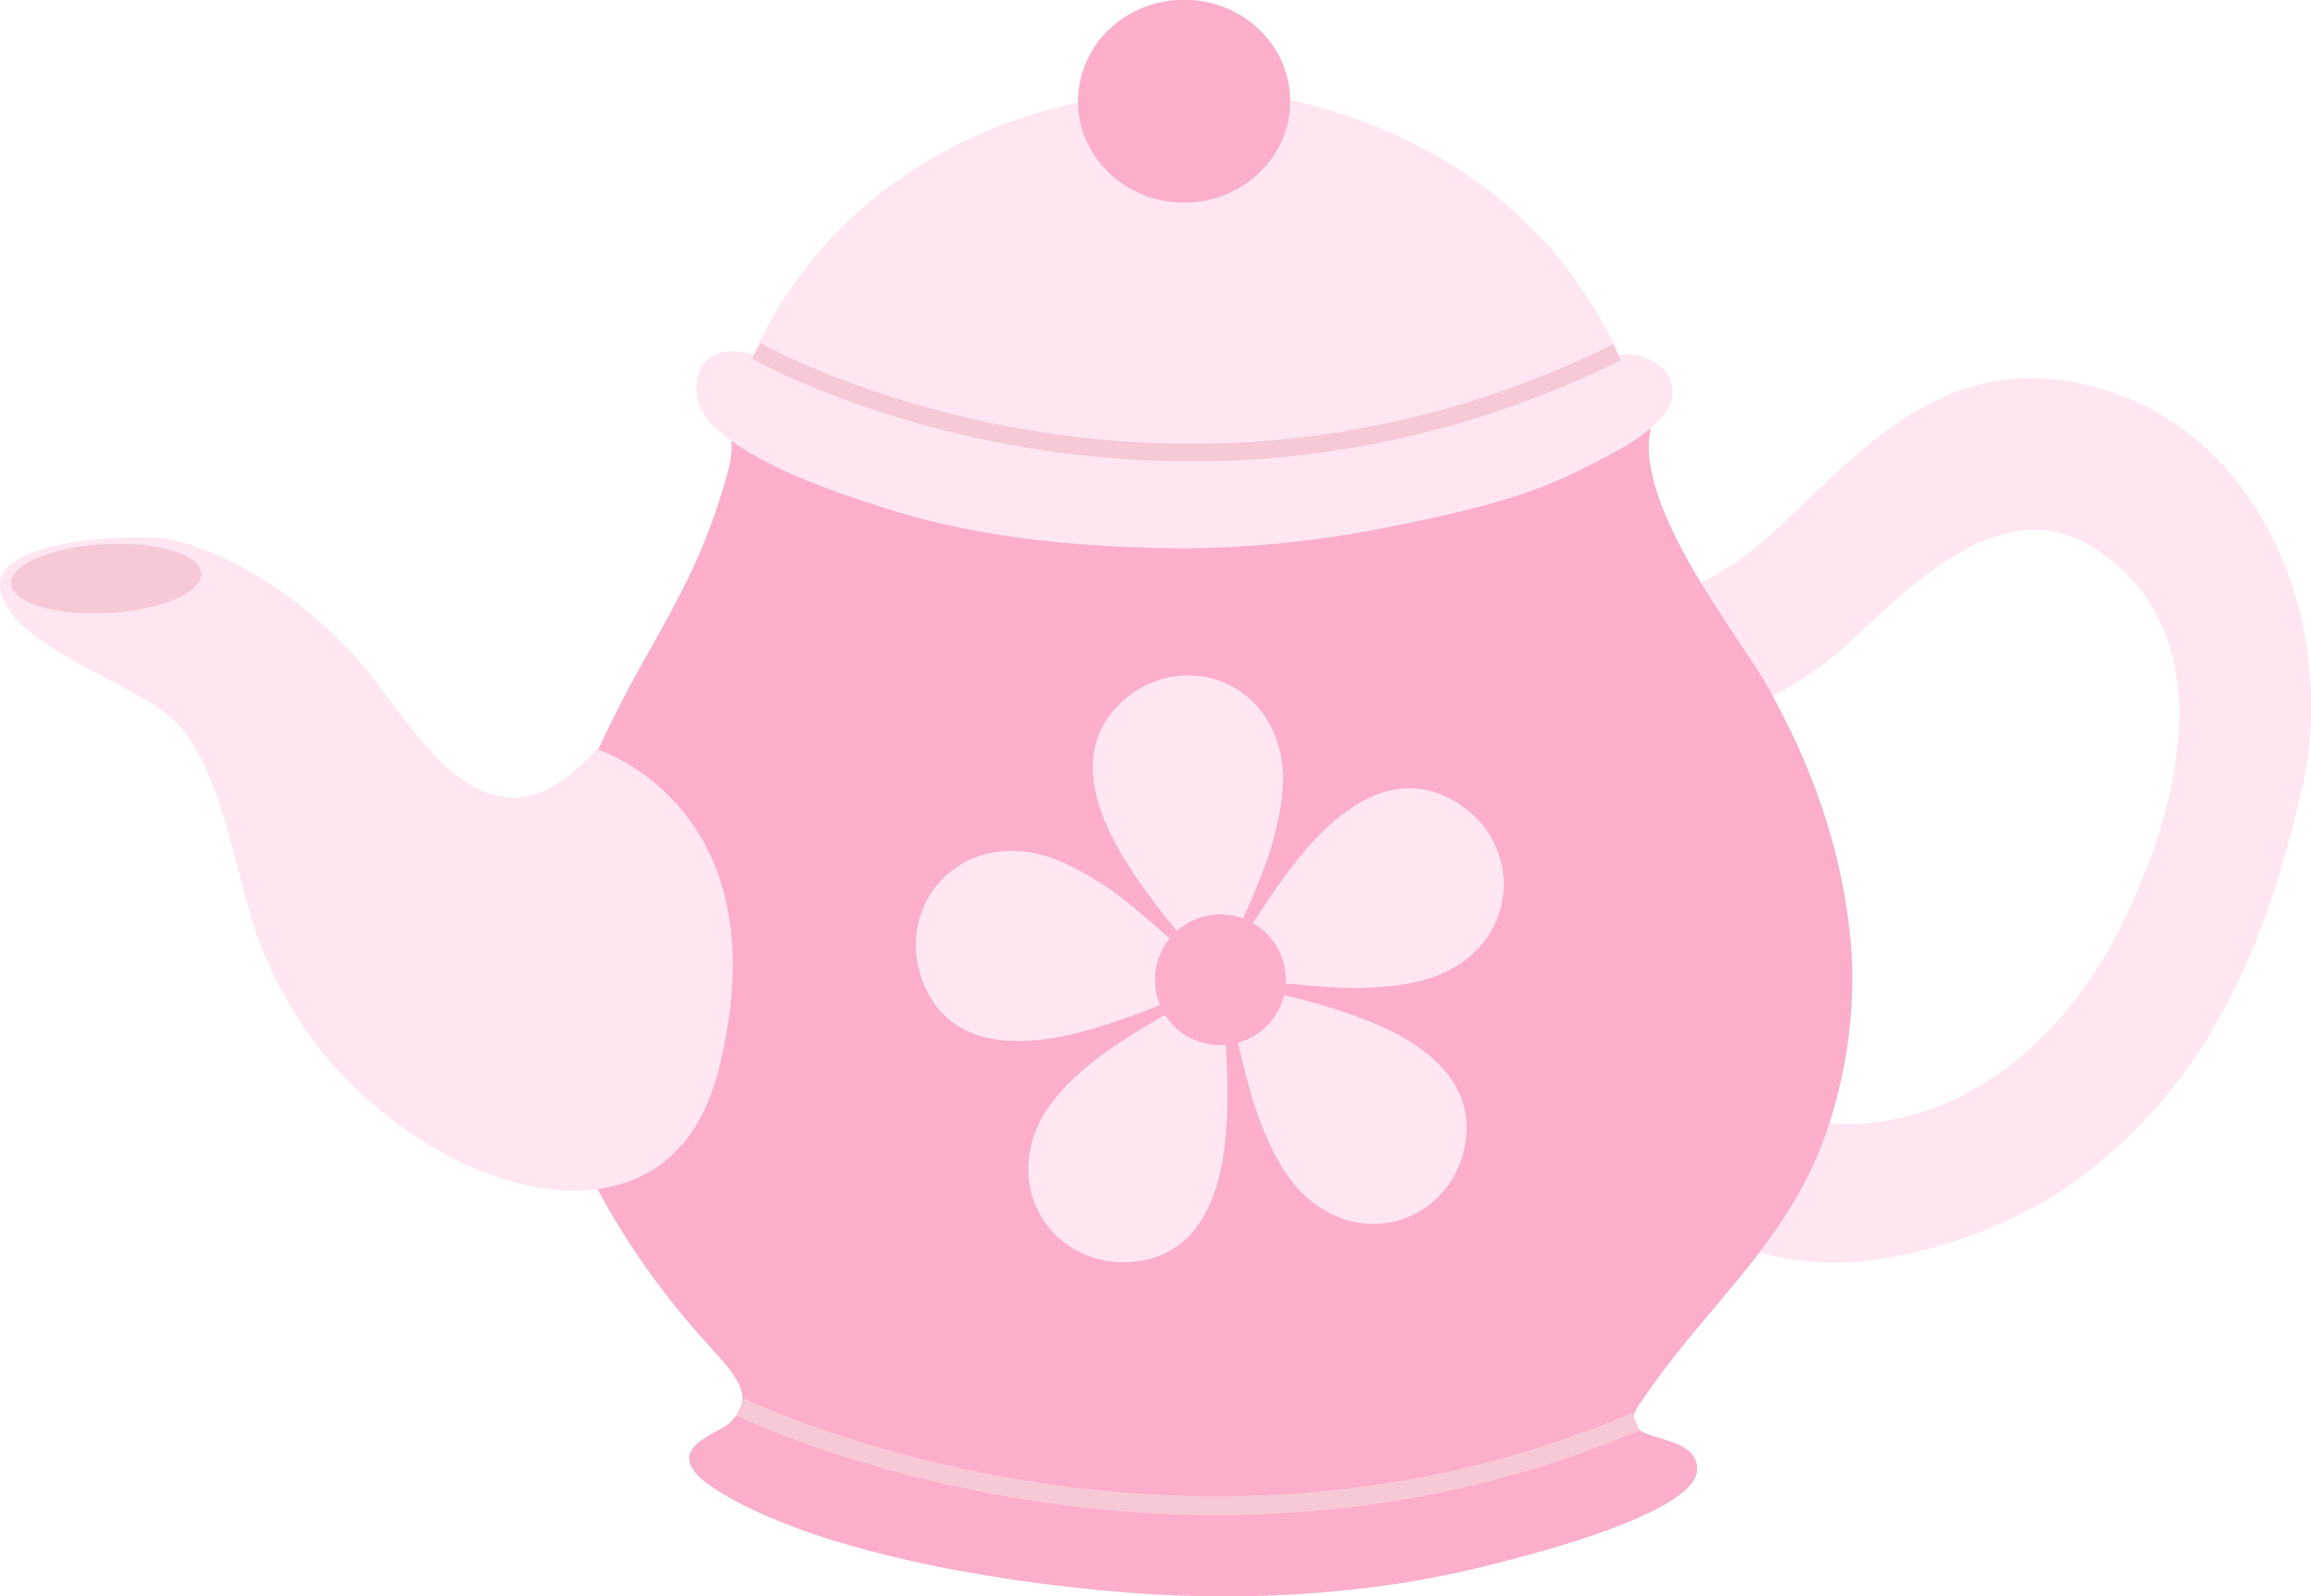 Floral clipart teapot. Heart free on dumielauxepices